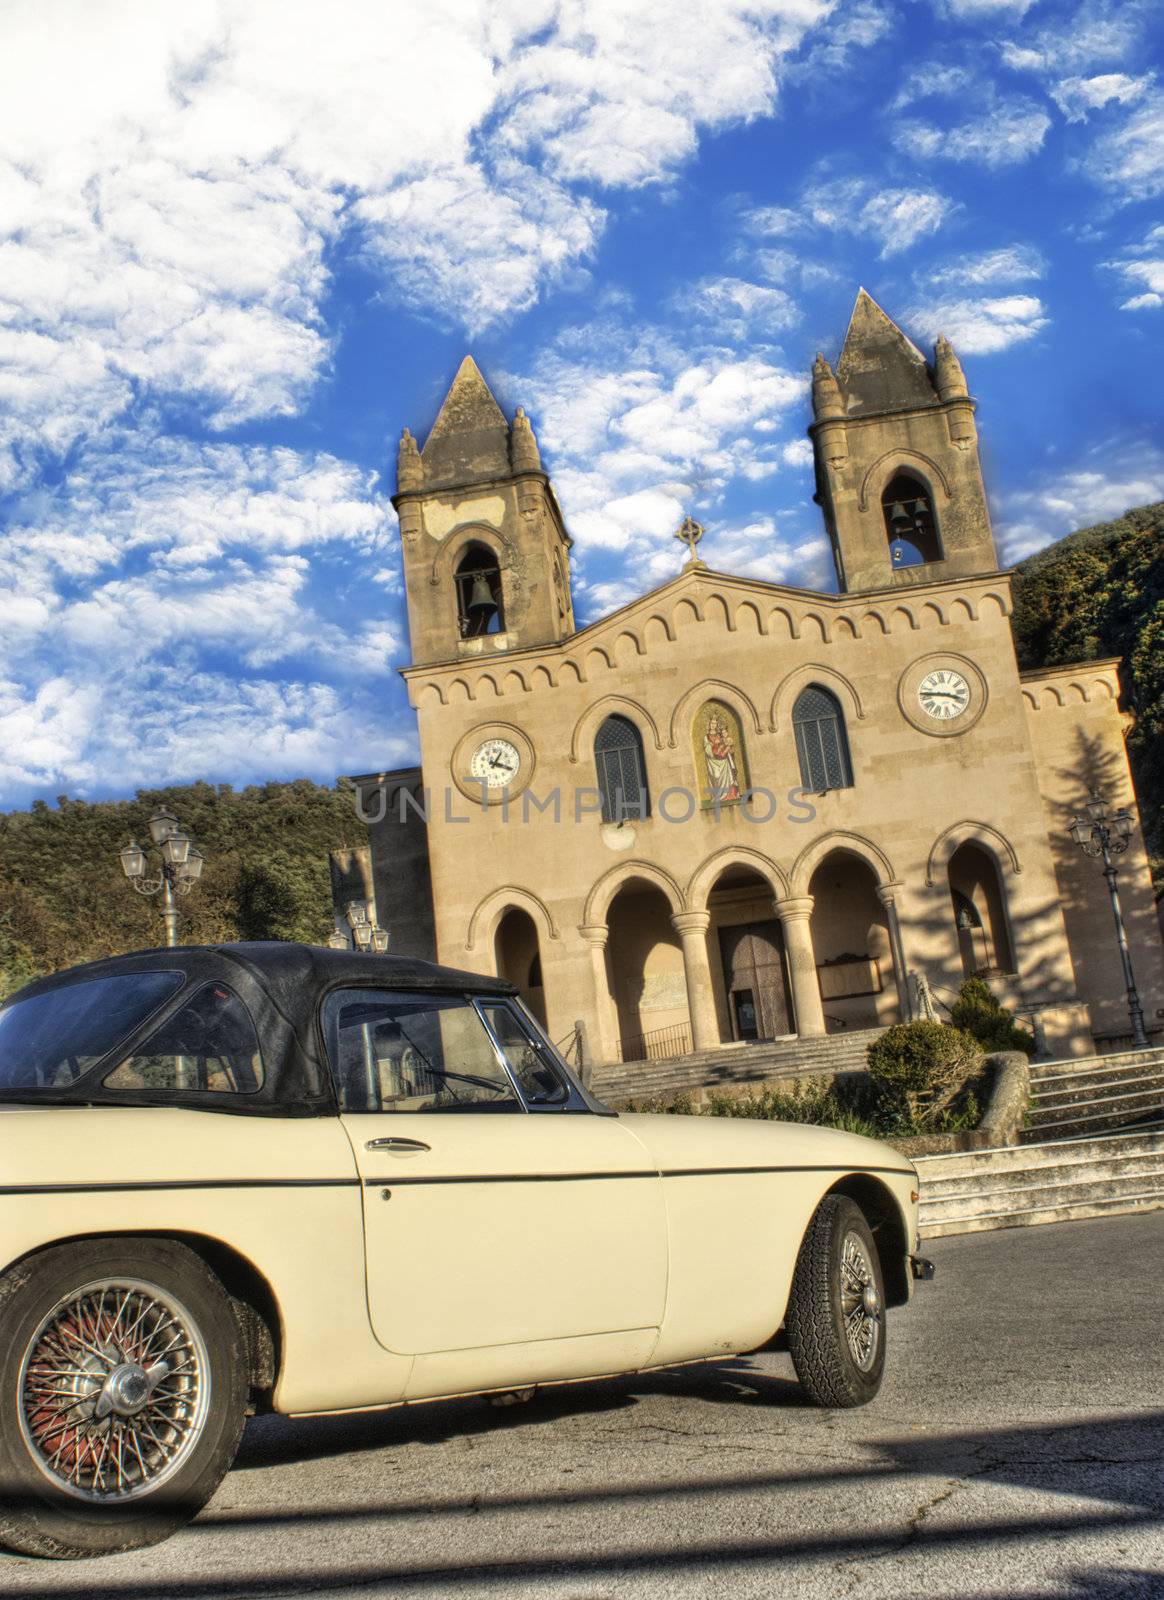 old car and the background of the shrine Gibilmanna